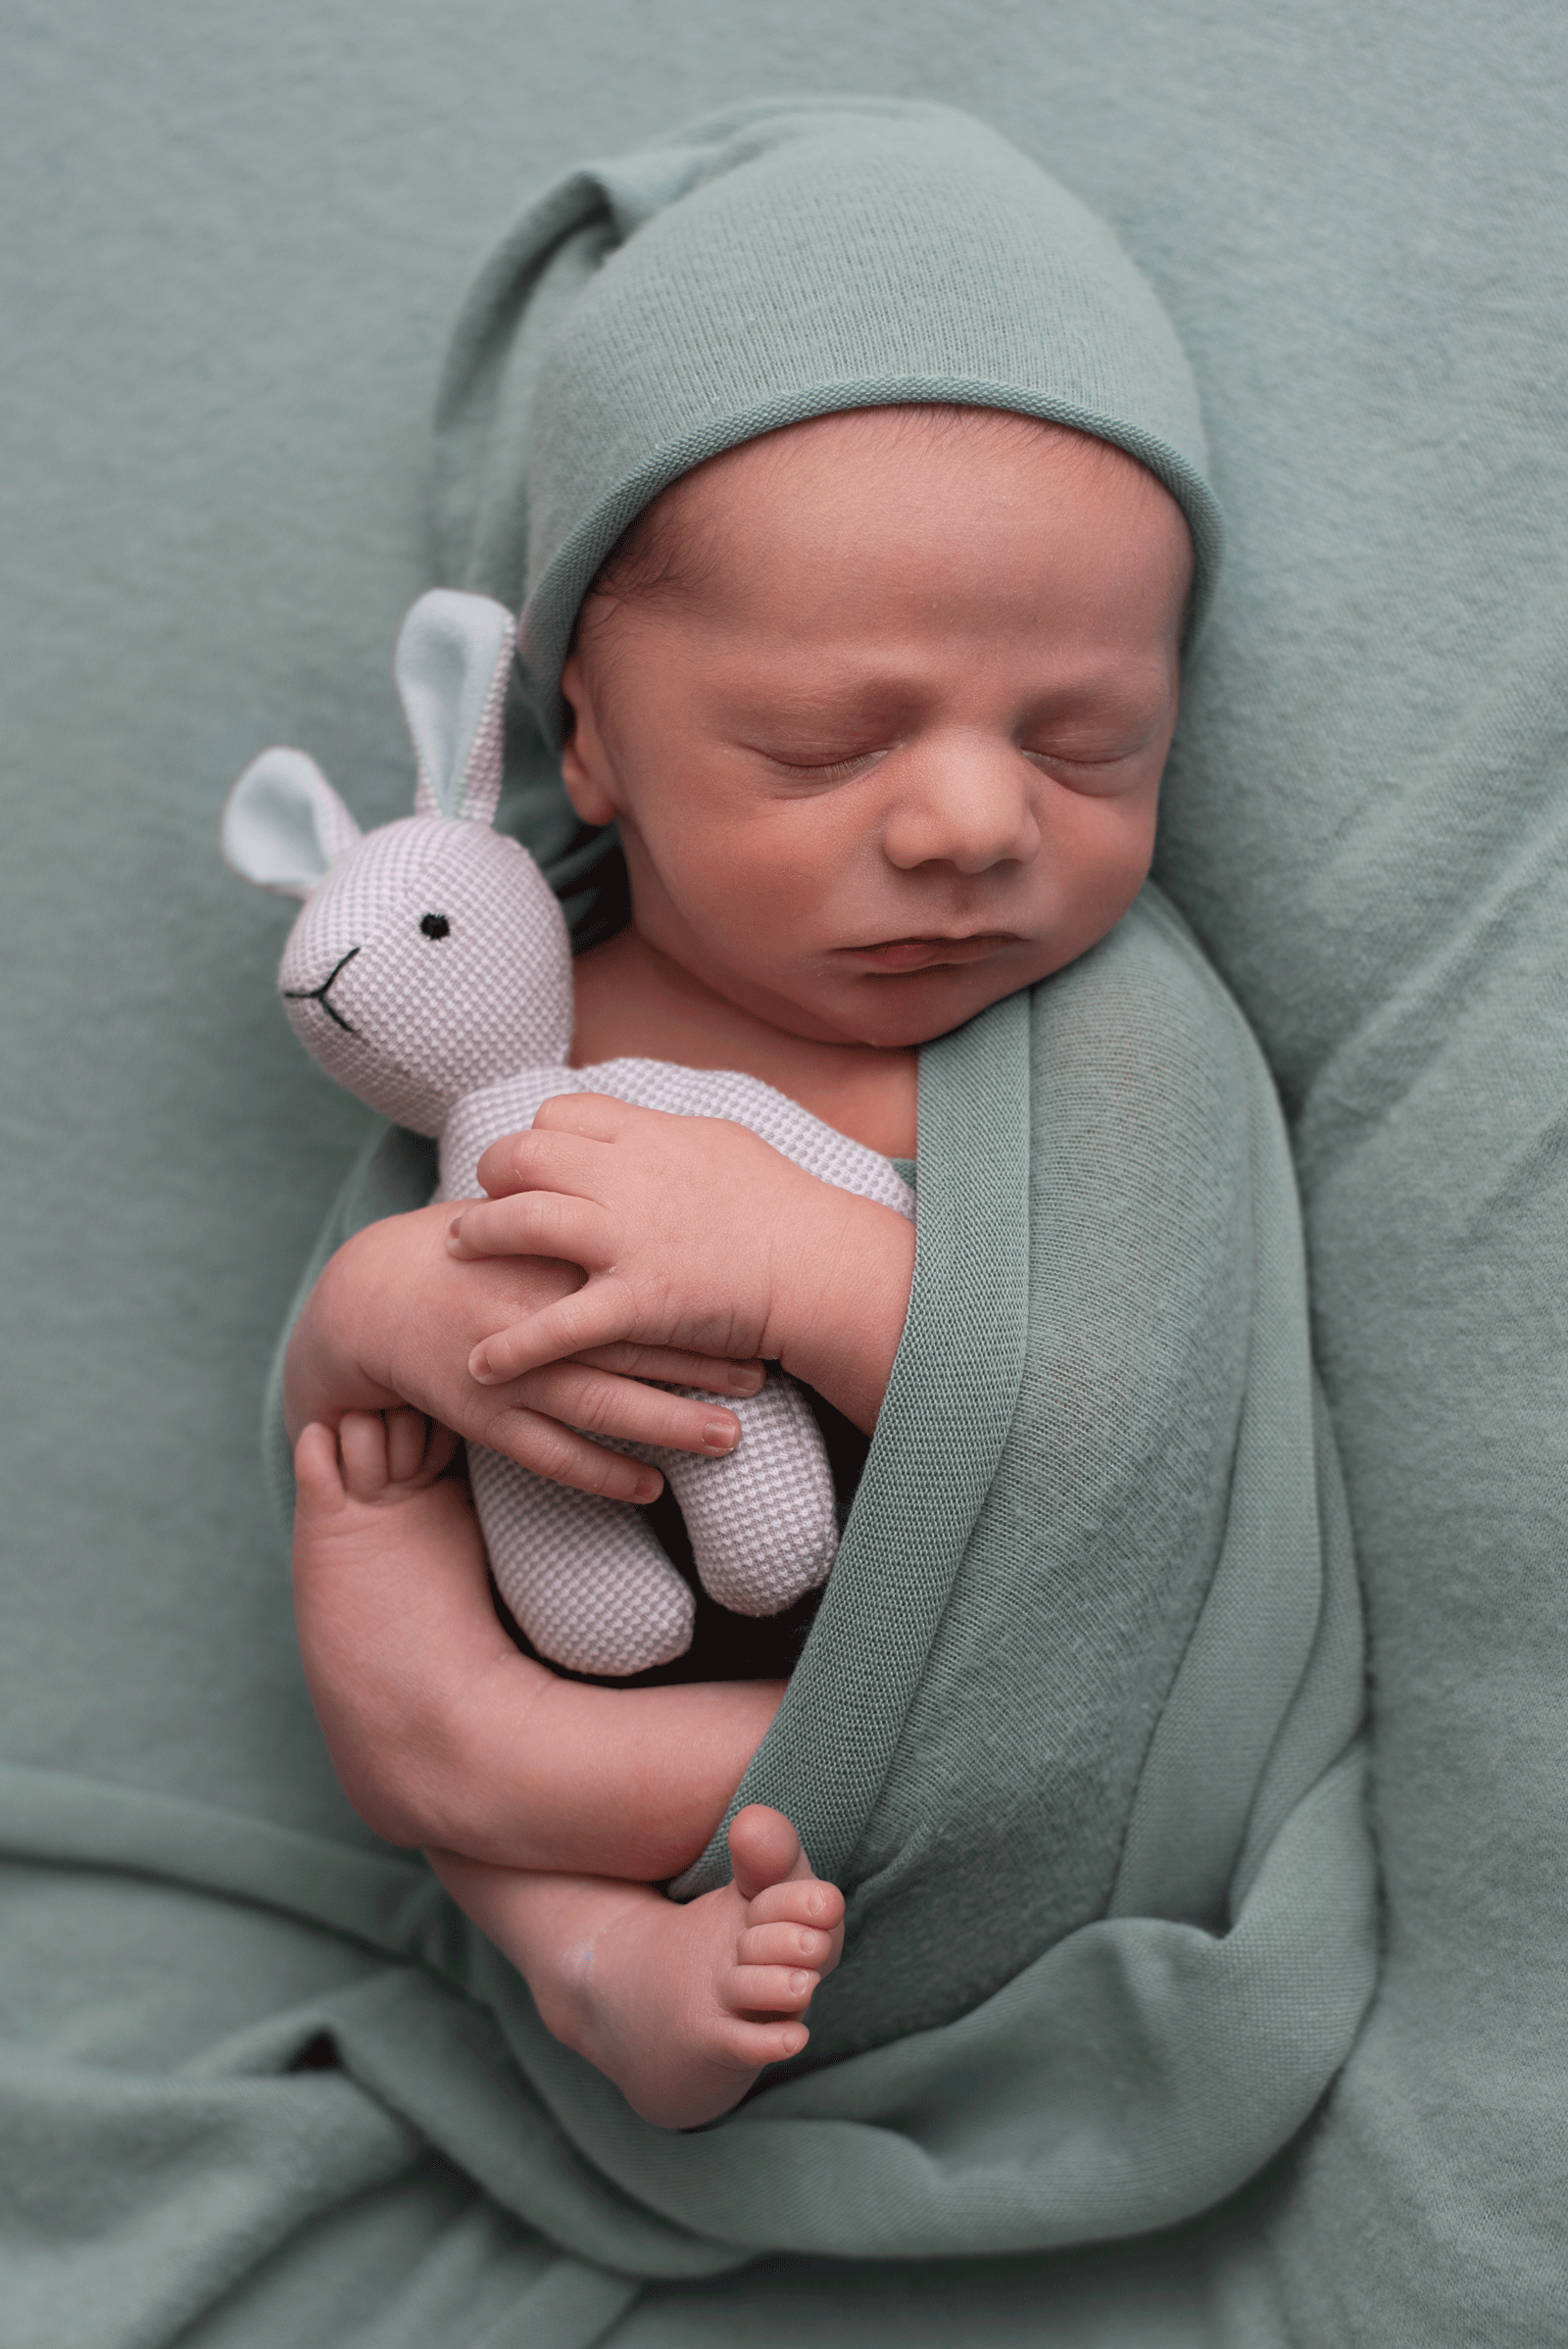 newborn baby wrapped in seafoam colored blanket